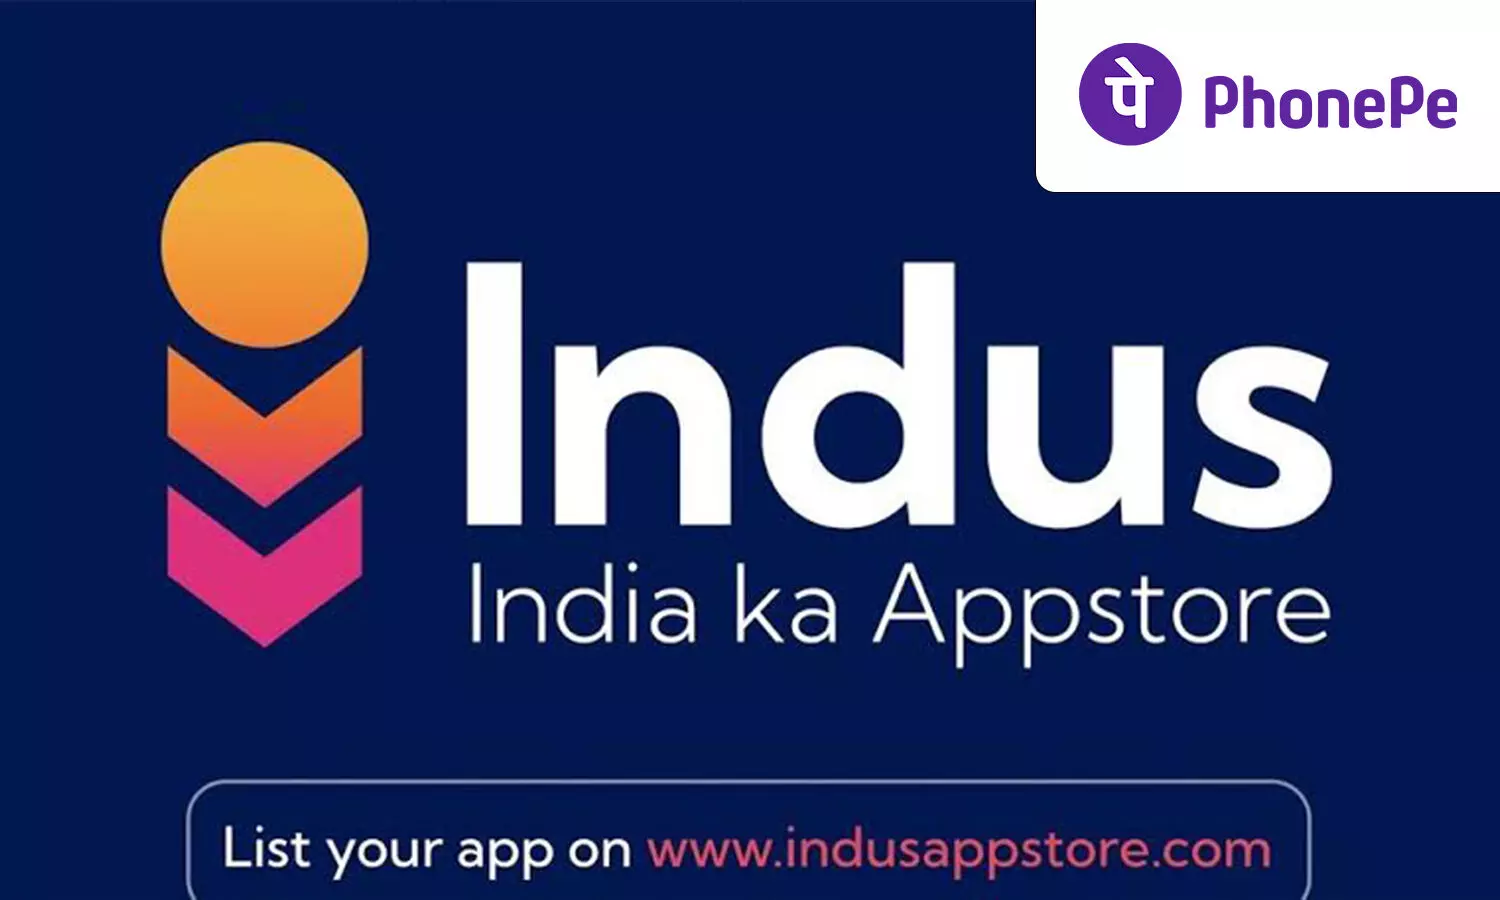 PhonePe Indus Appstore launch